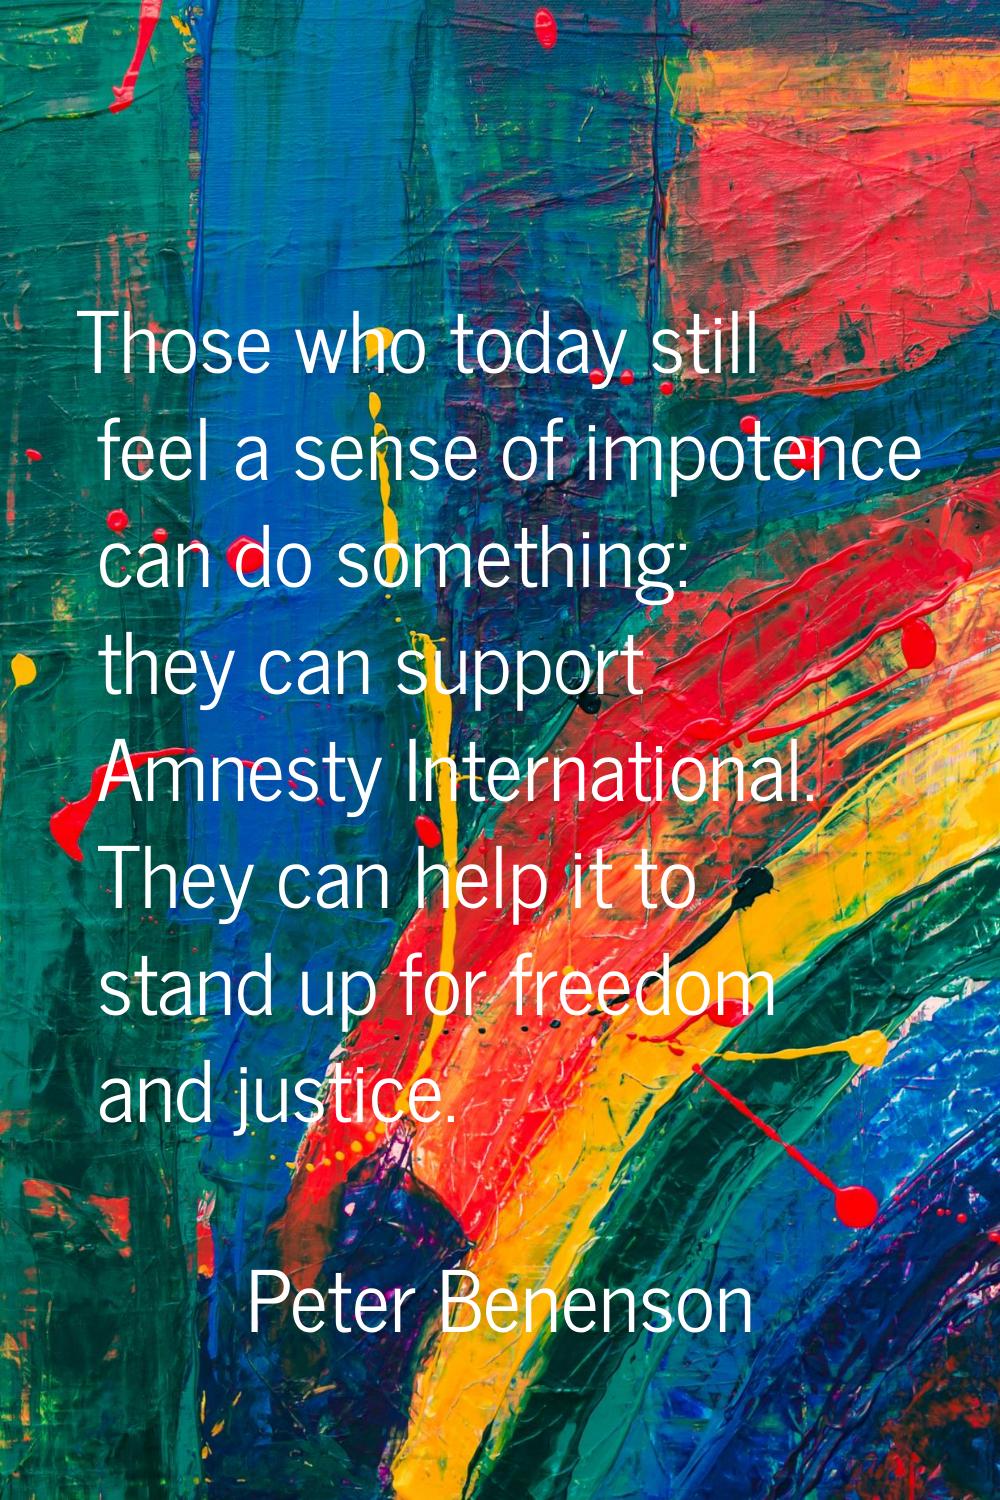 Those who today still feel a sense of impotence can do something: they can support Amnesty Internat